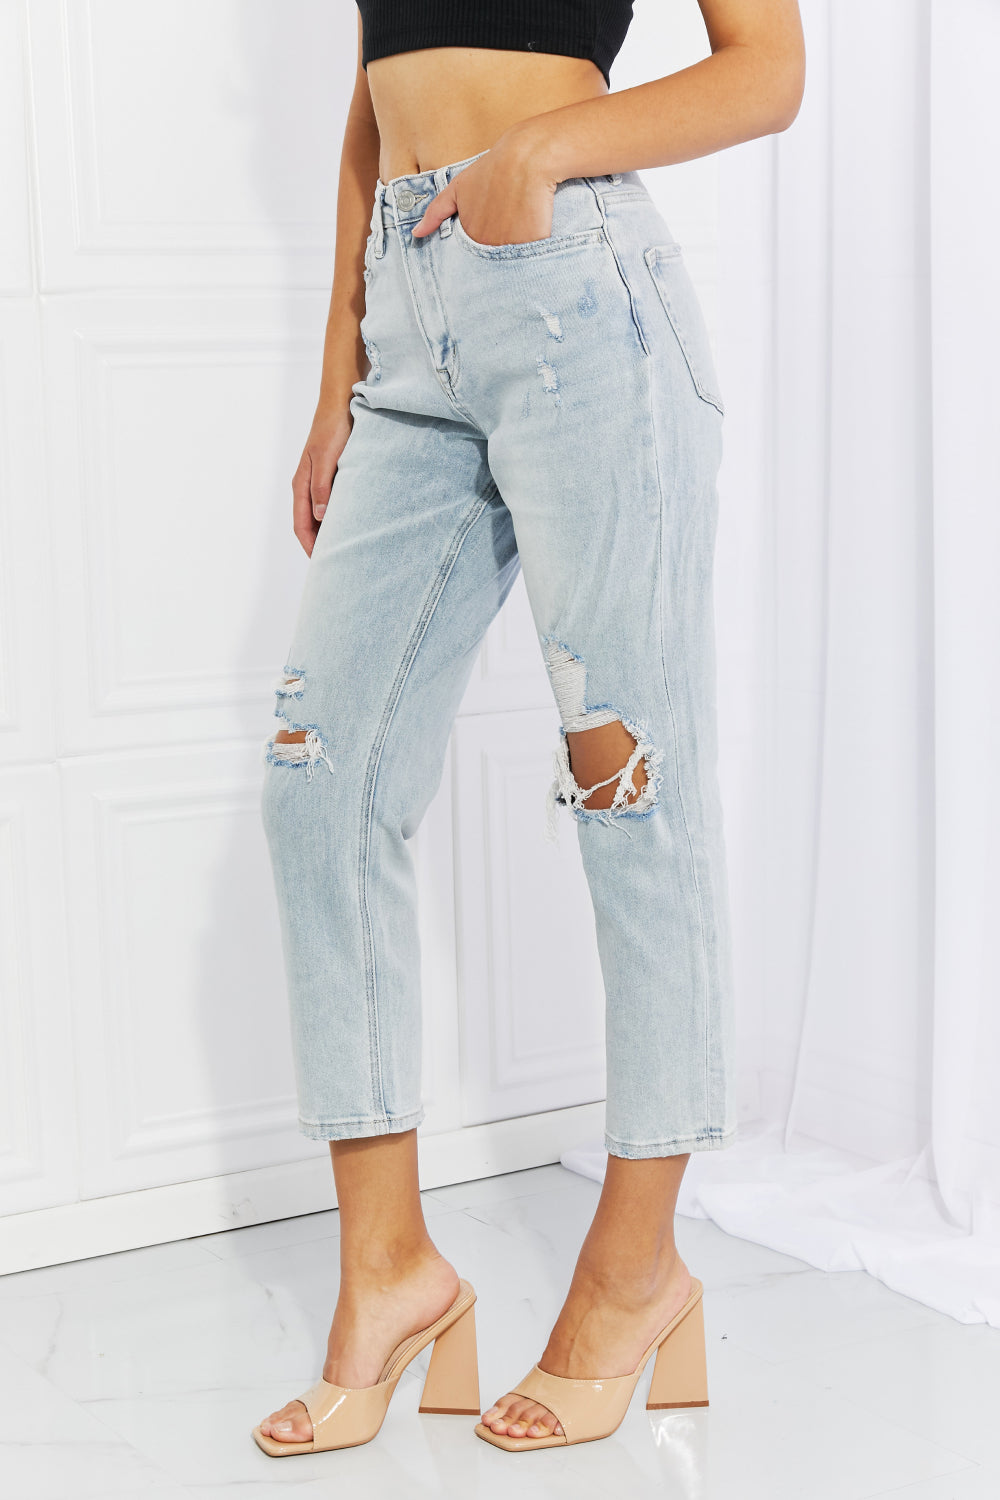 Vervet by Flying Monkey Stand Out Full Size Distressed Cropped Jeans - DromedarShop.com Online Boutique